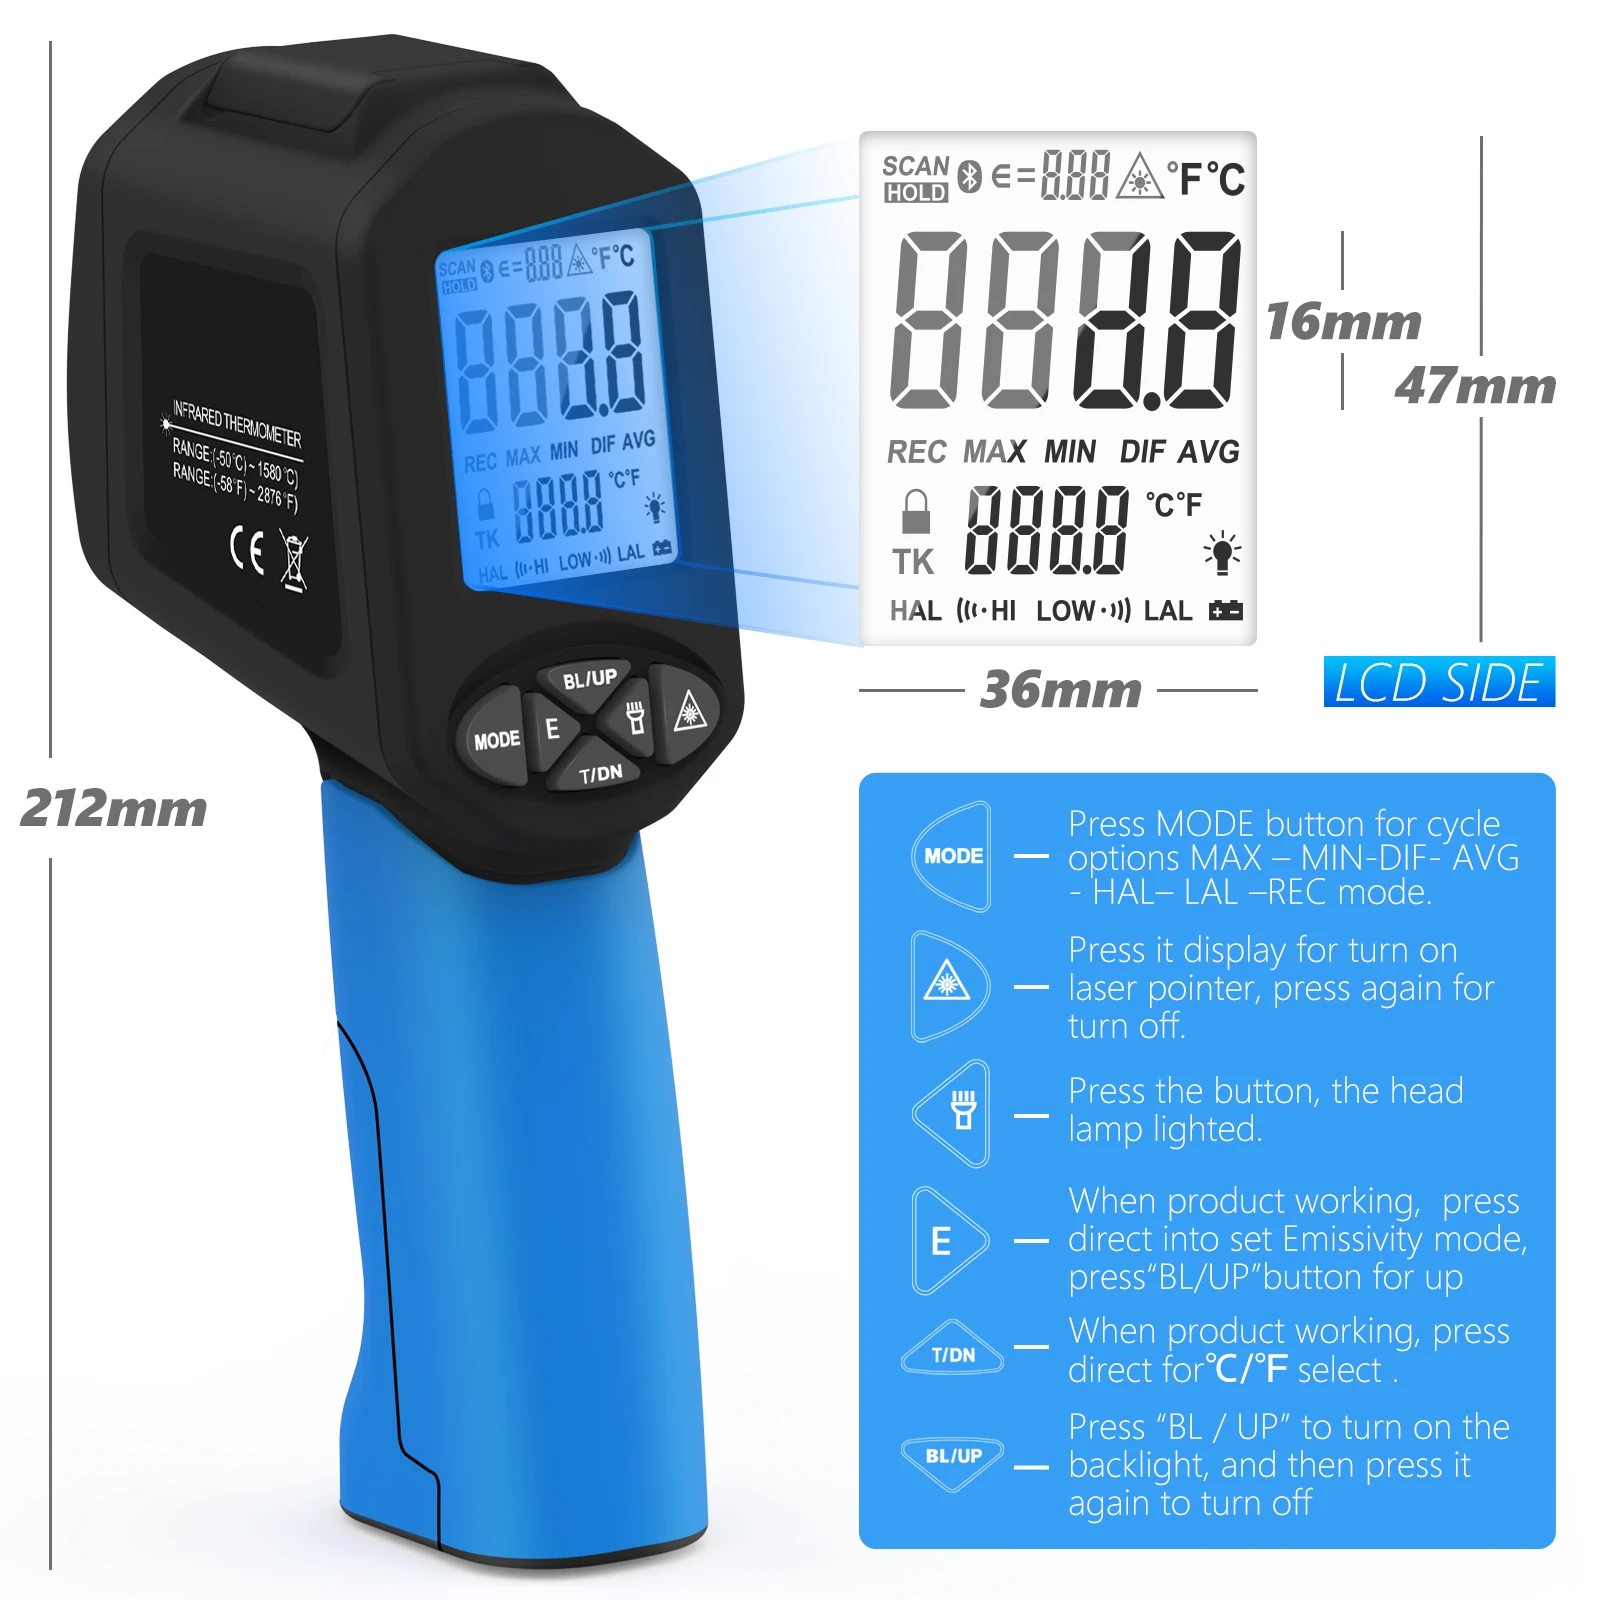 https://ae01.alicdn.com/kf/S5abf86ac2a144abfb942f0c1be8ff009k/BT-1880-Pyrometer-50-1880-58-to-3416-D-S-50-1-High-Temperature-Infrared-Thermometer.jpg